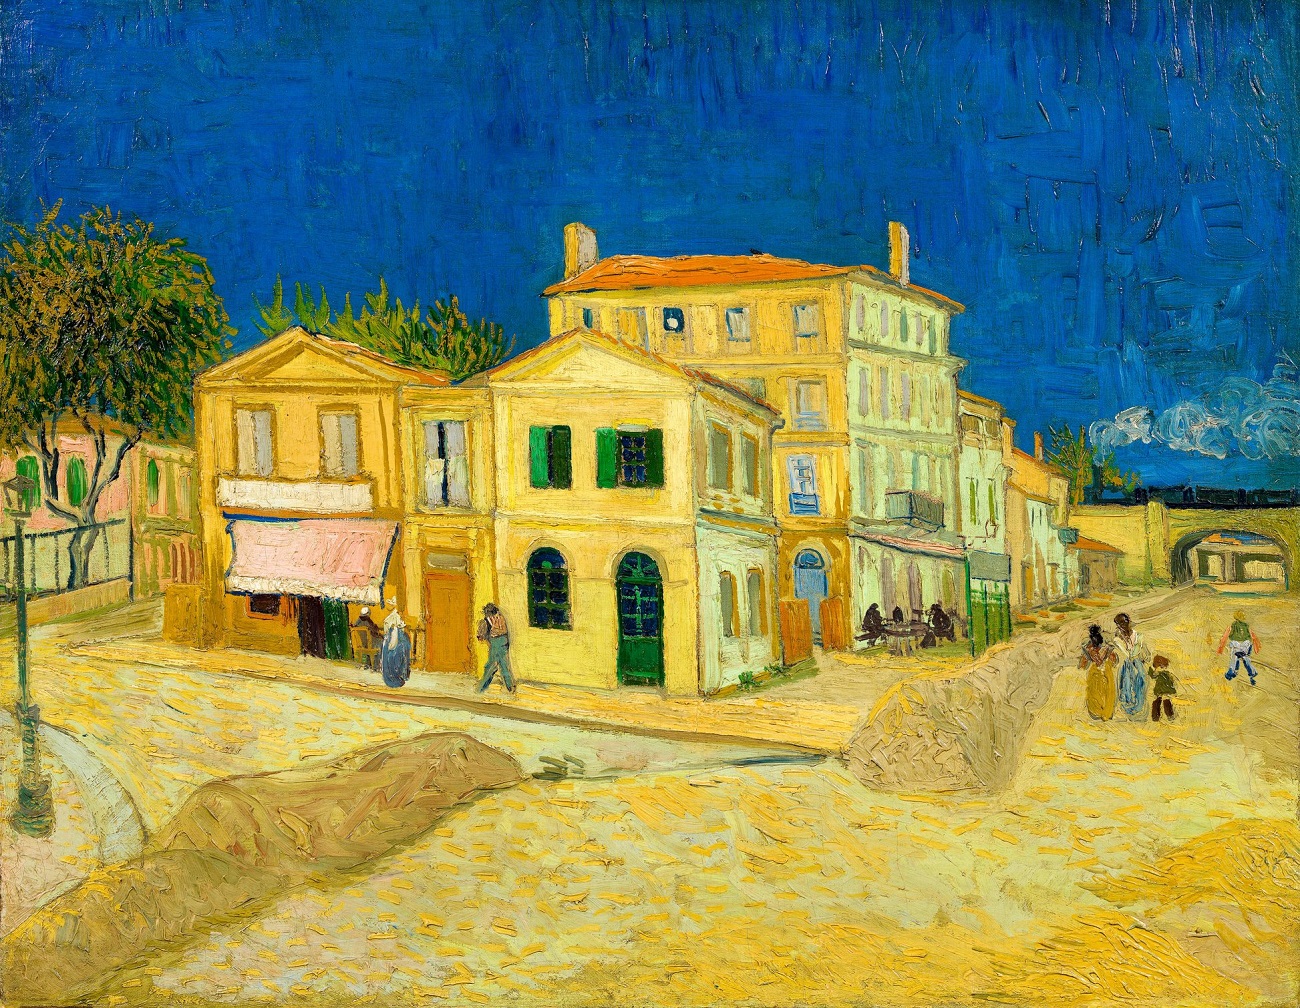 vincent van gogh, the yellow house (the street), post impressionist painting, 1888